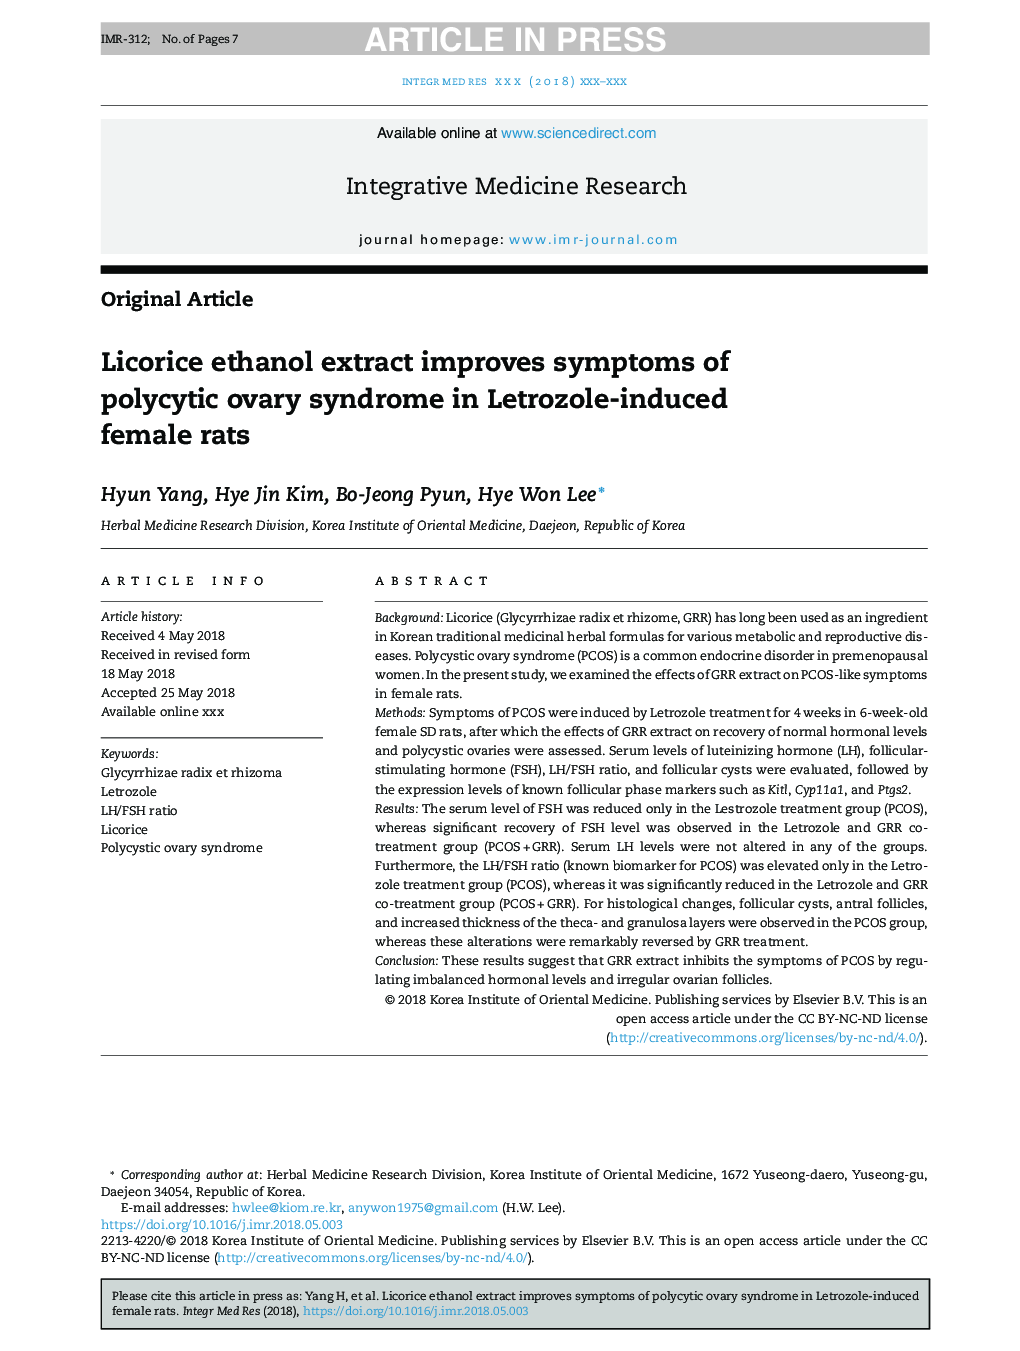 Licorice ethanol extract improves symptoms of polycytic ovary syndrome in Letrozole-induced female rats